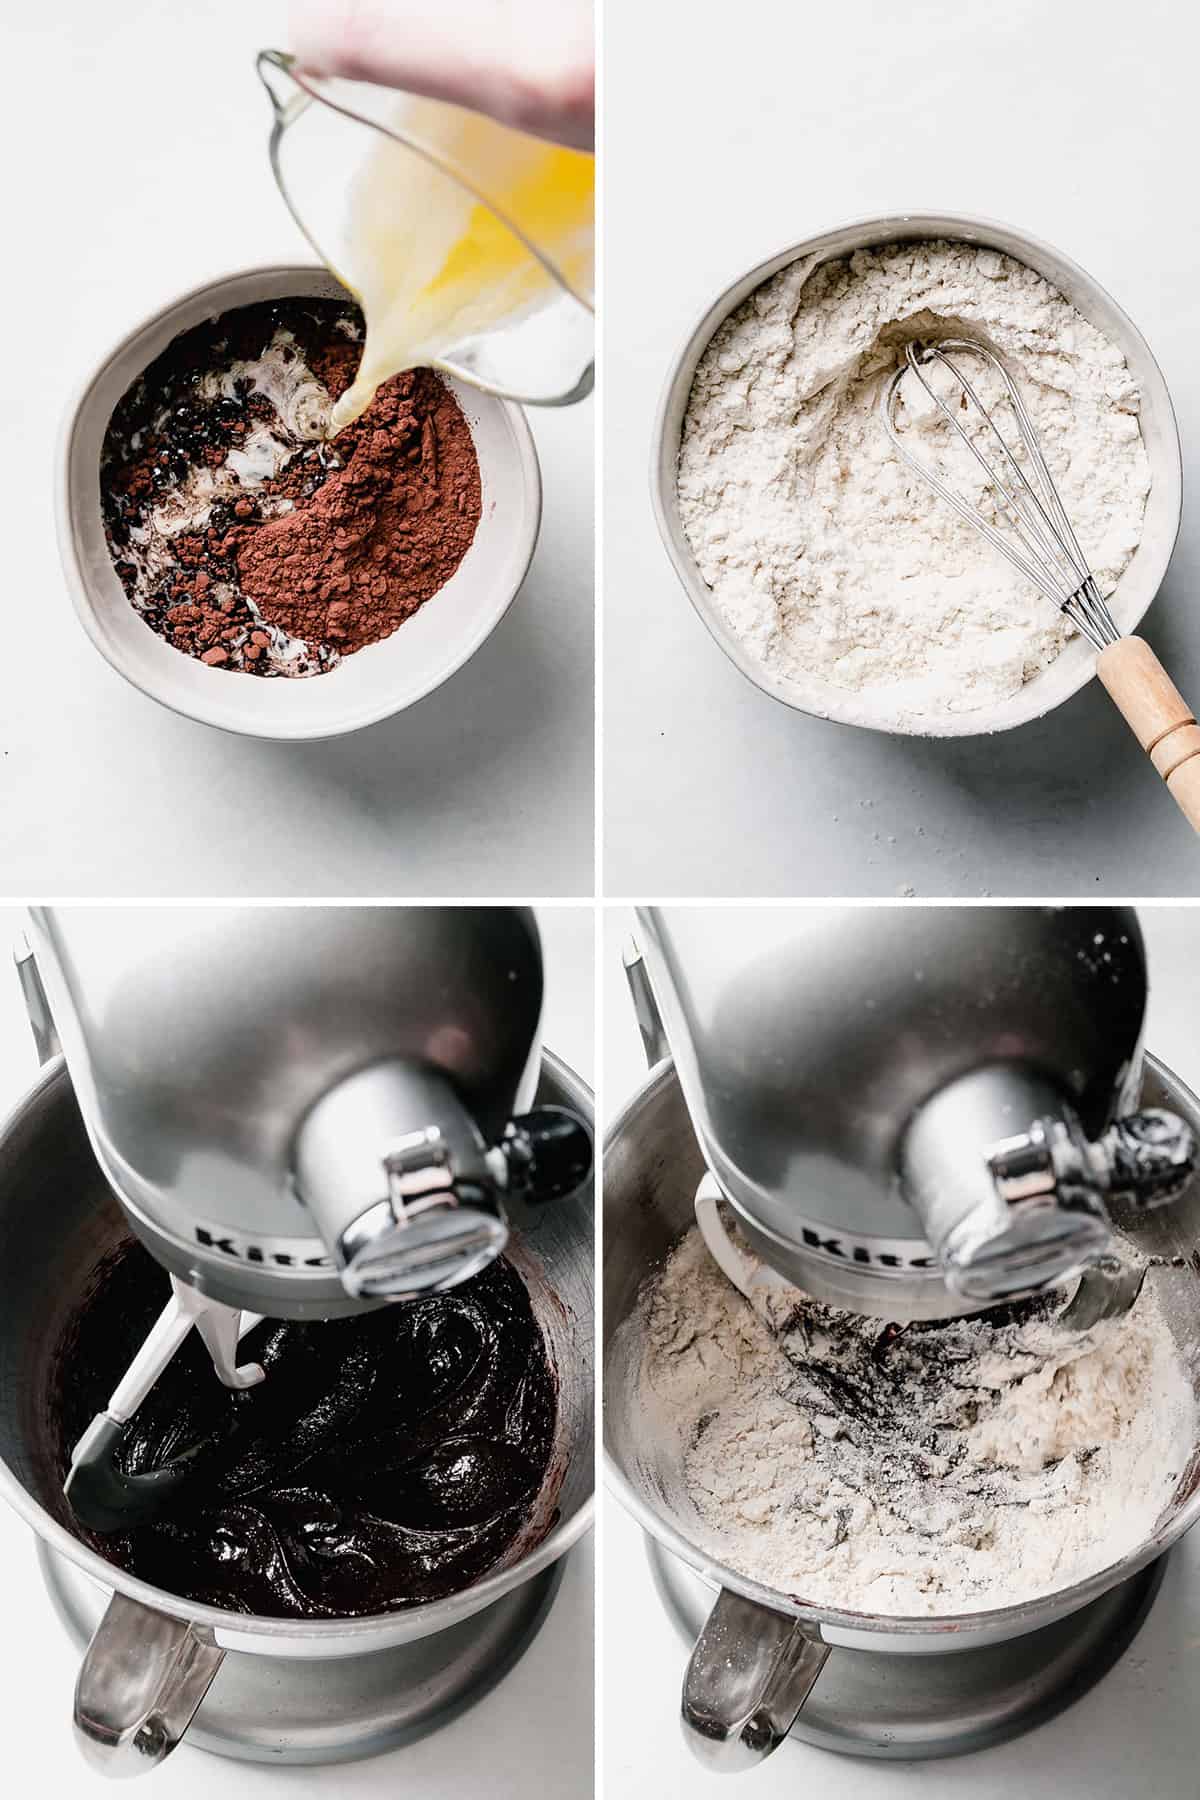 Image collage showing cocoa powder and melted butter in bowl, flour in bowl with whisk, dark chocolate batter ribboned in stand mixer bowl, flour mixture on top of chocolate mixture in stand mixer bowl.